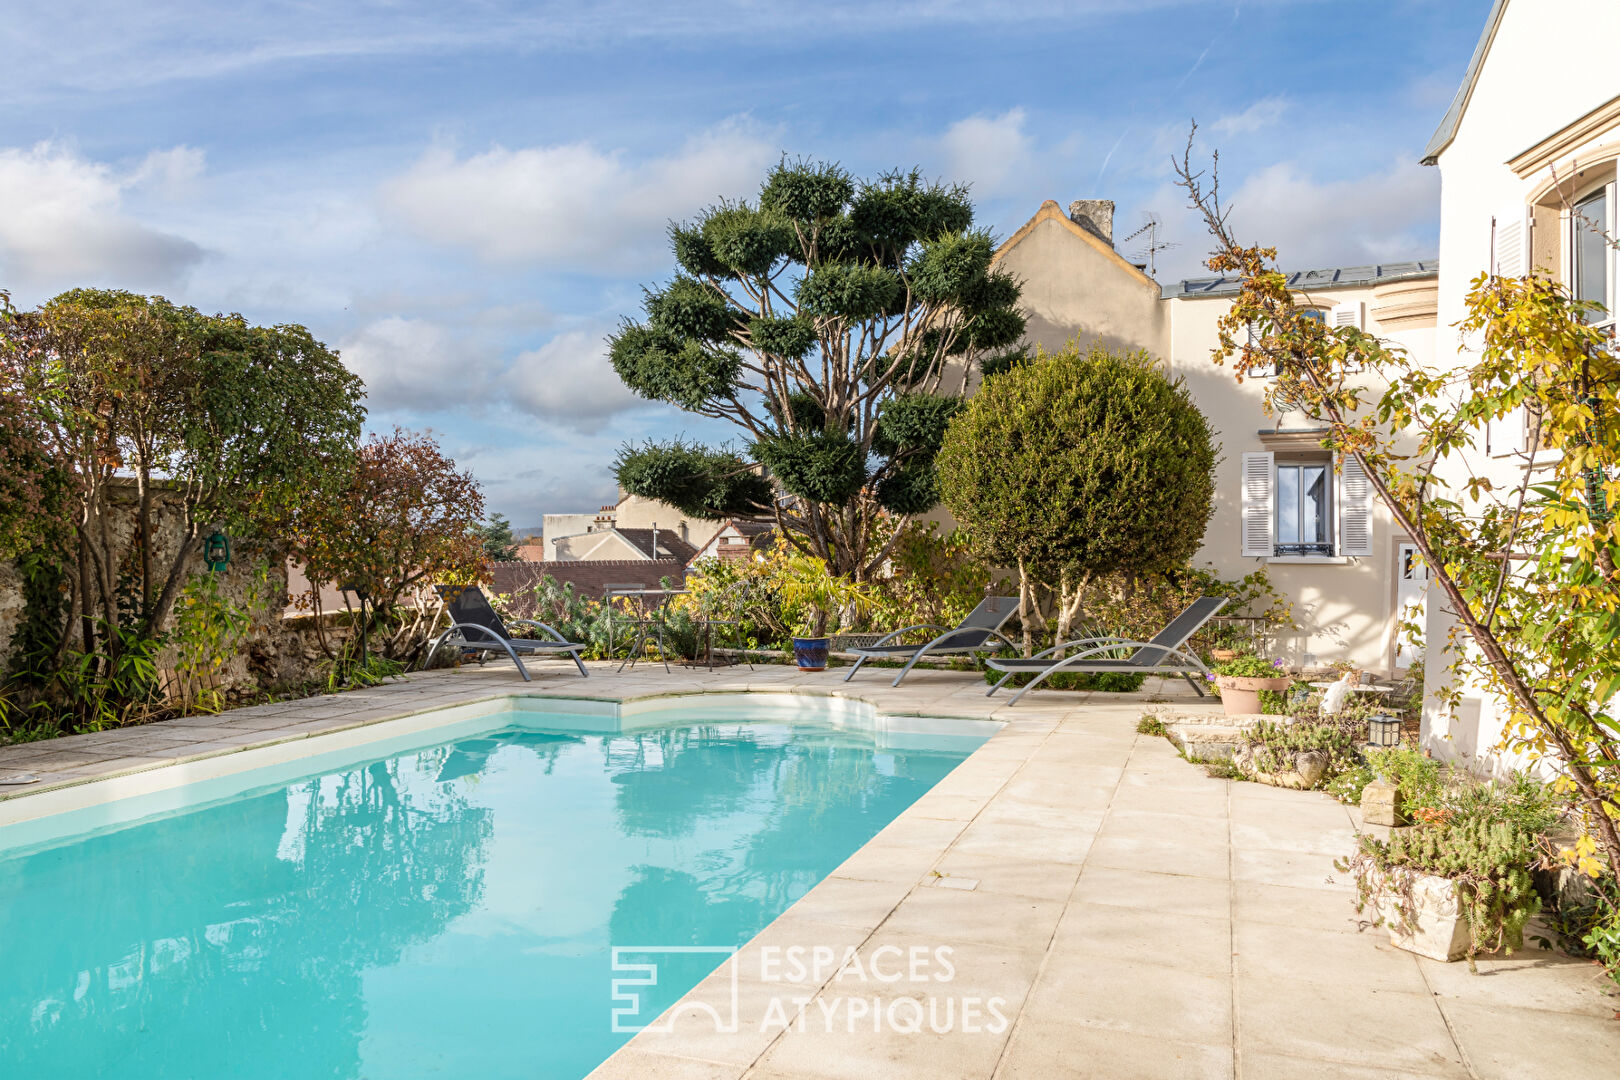 Charming house and its turret: calm and idleness around the swimming pool in the city center.